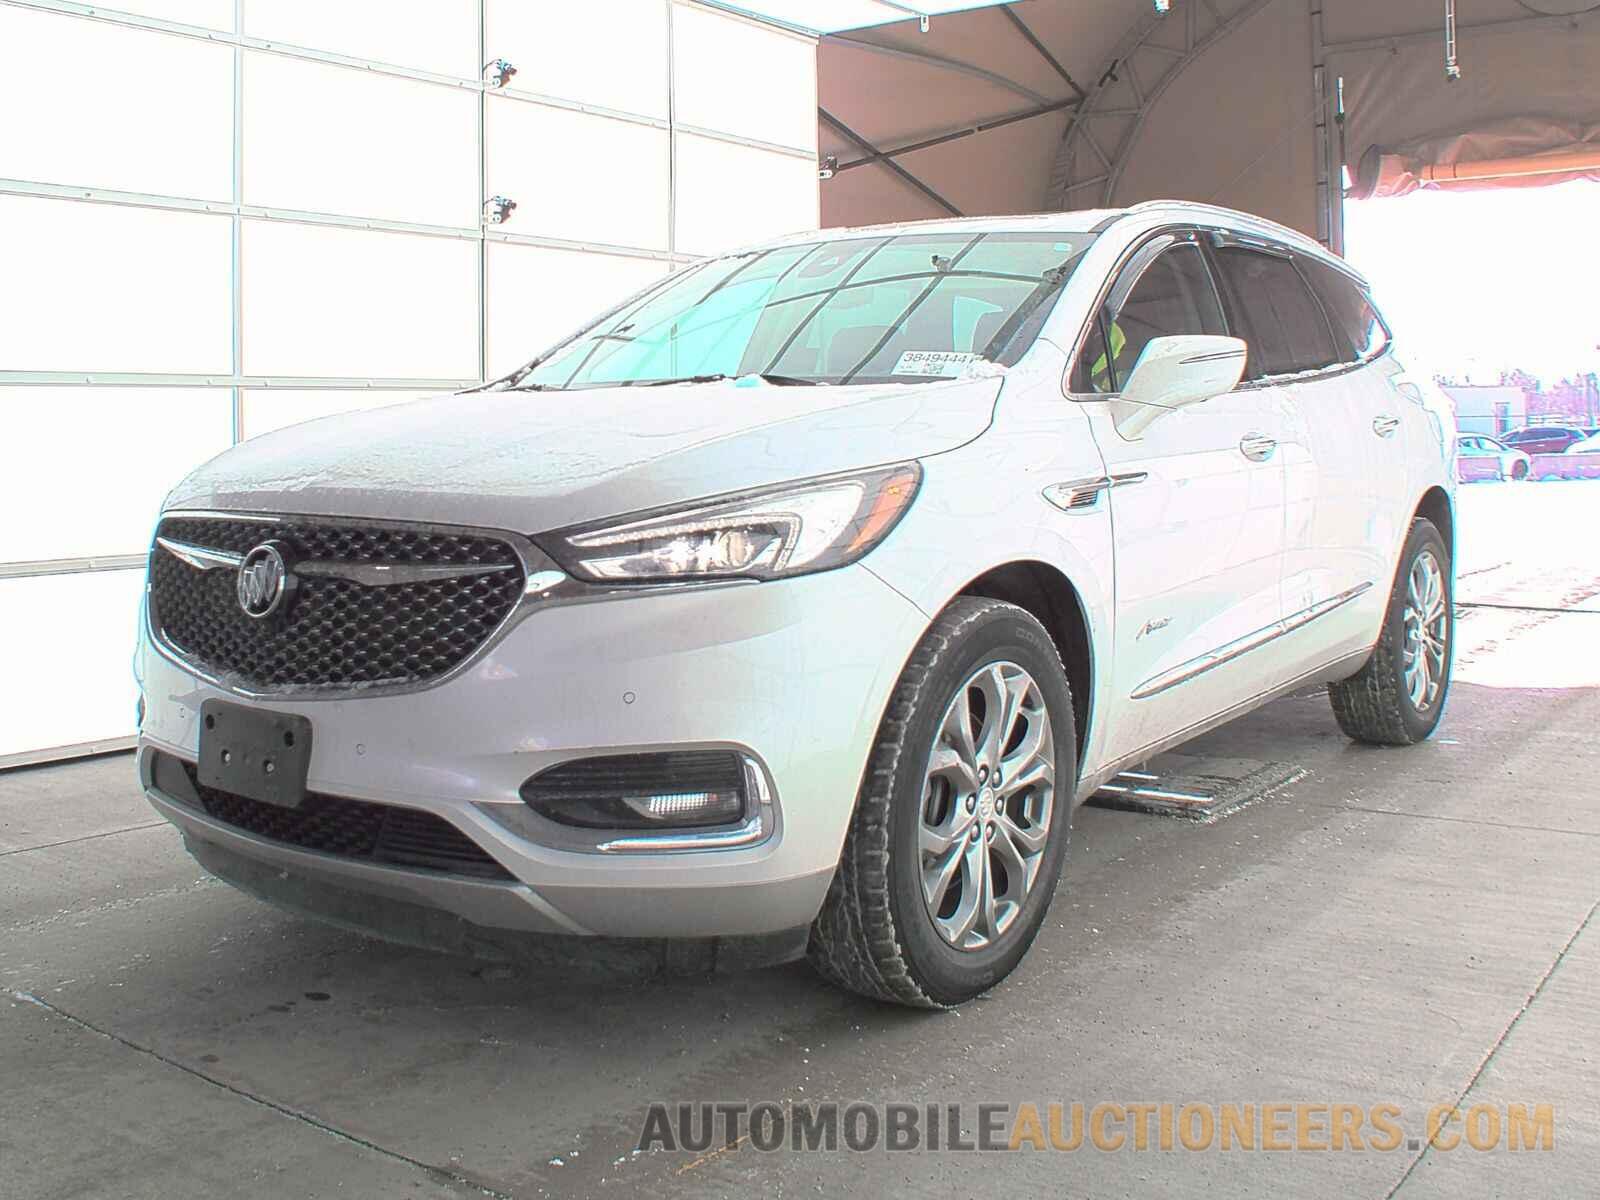 5GAEVCKW7JJ285870 Buick Enclave 2018